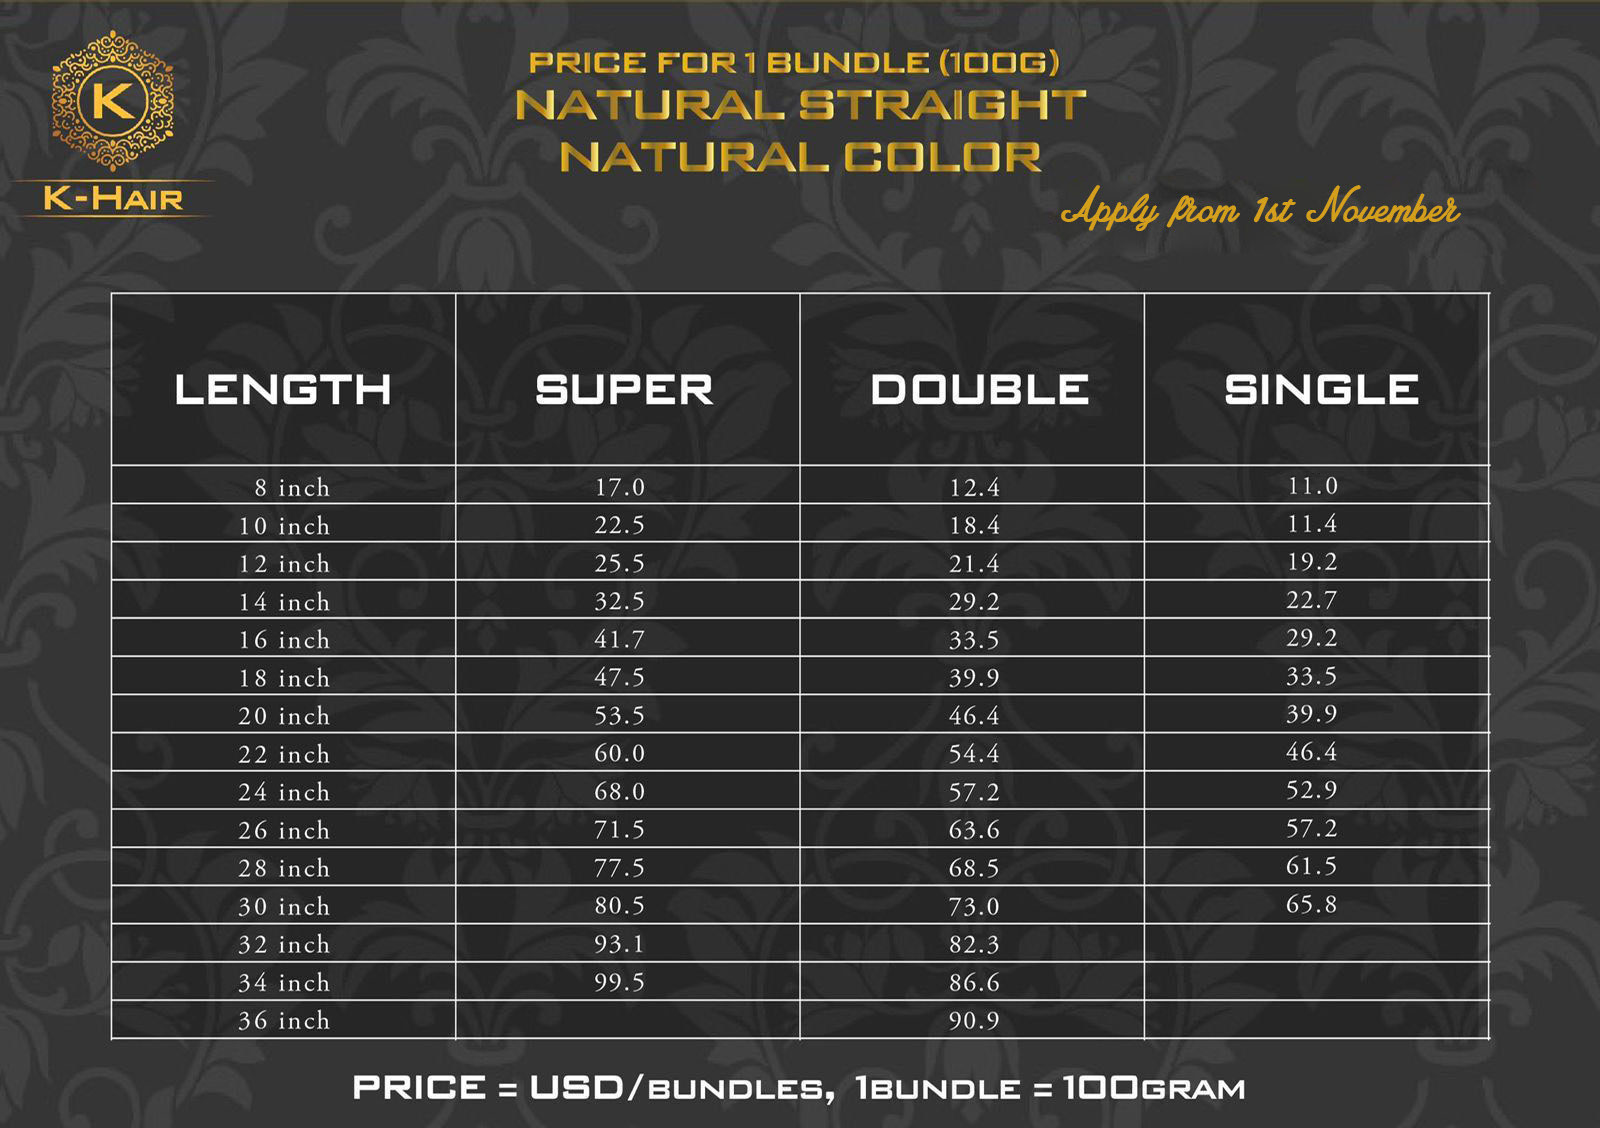 Price of natural straight hair from K-Hair